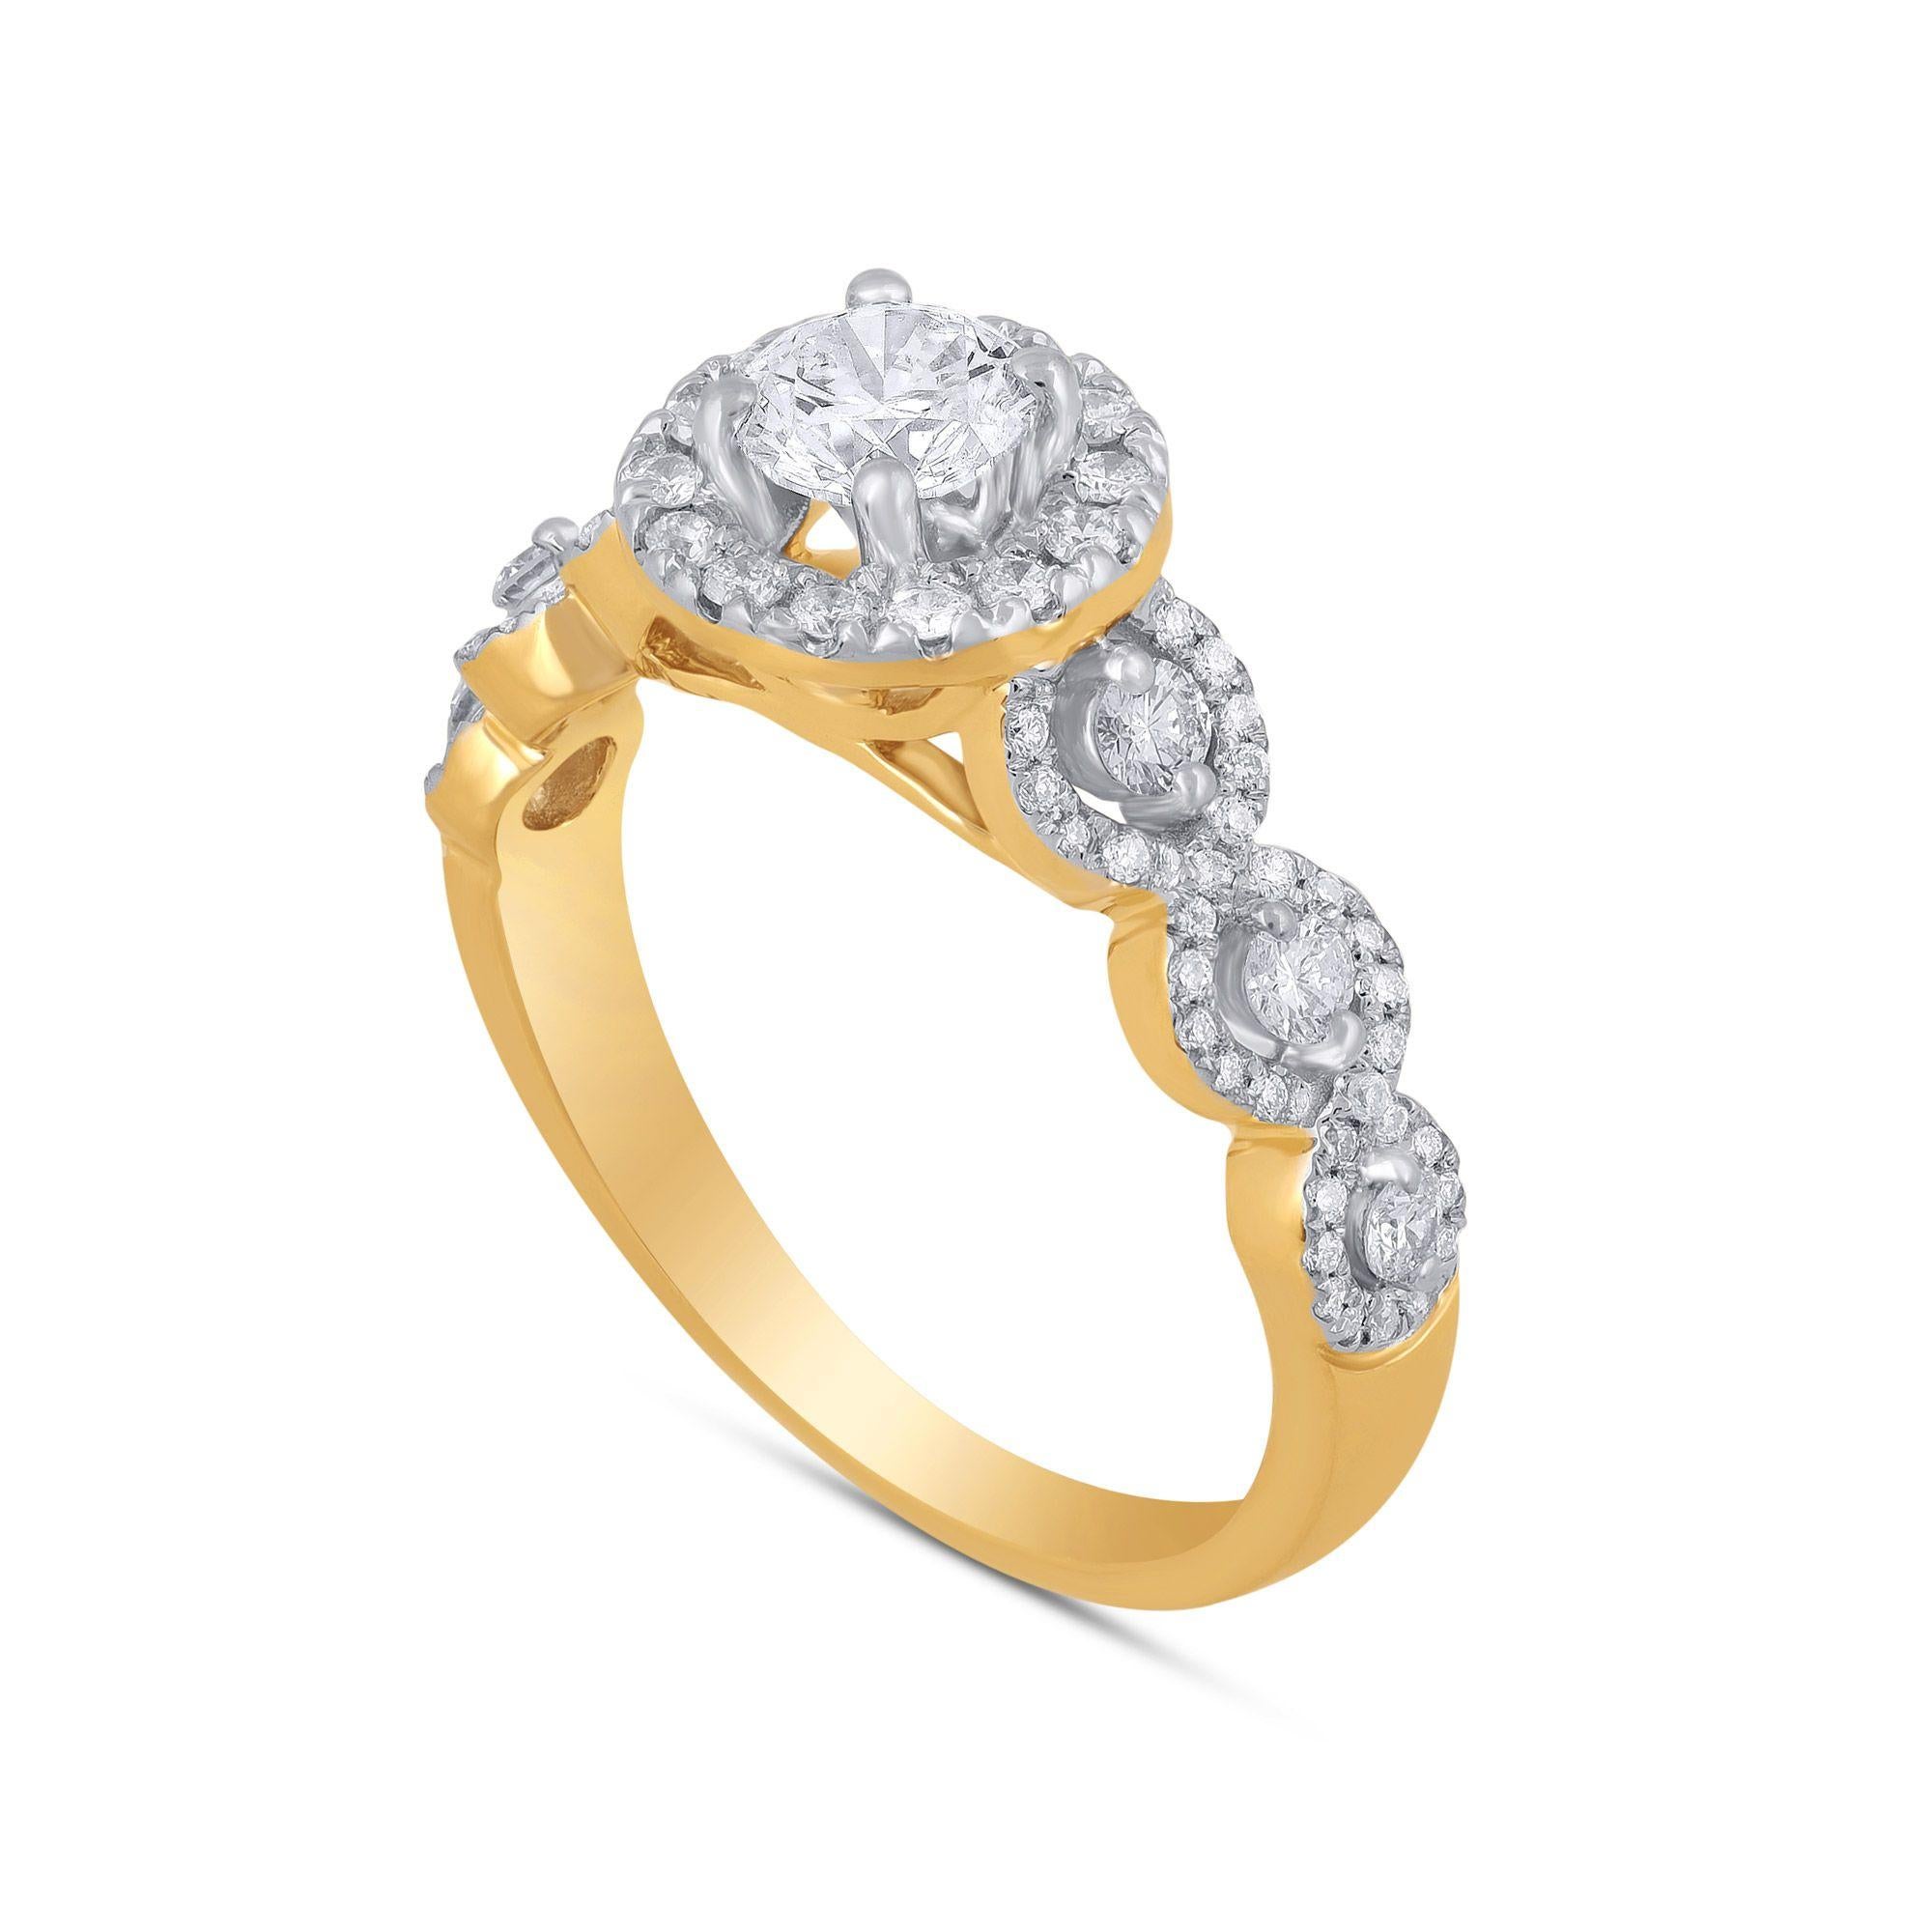 A gorgeous 14-karat Yellow Gold and Diamond Bridal Ring the ring is studded with 85 diamonds in prong and pave setting. Diamonds are graded G-H Color, I1-I2 Clarity. 
